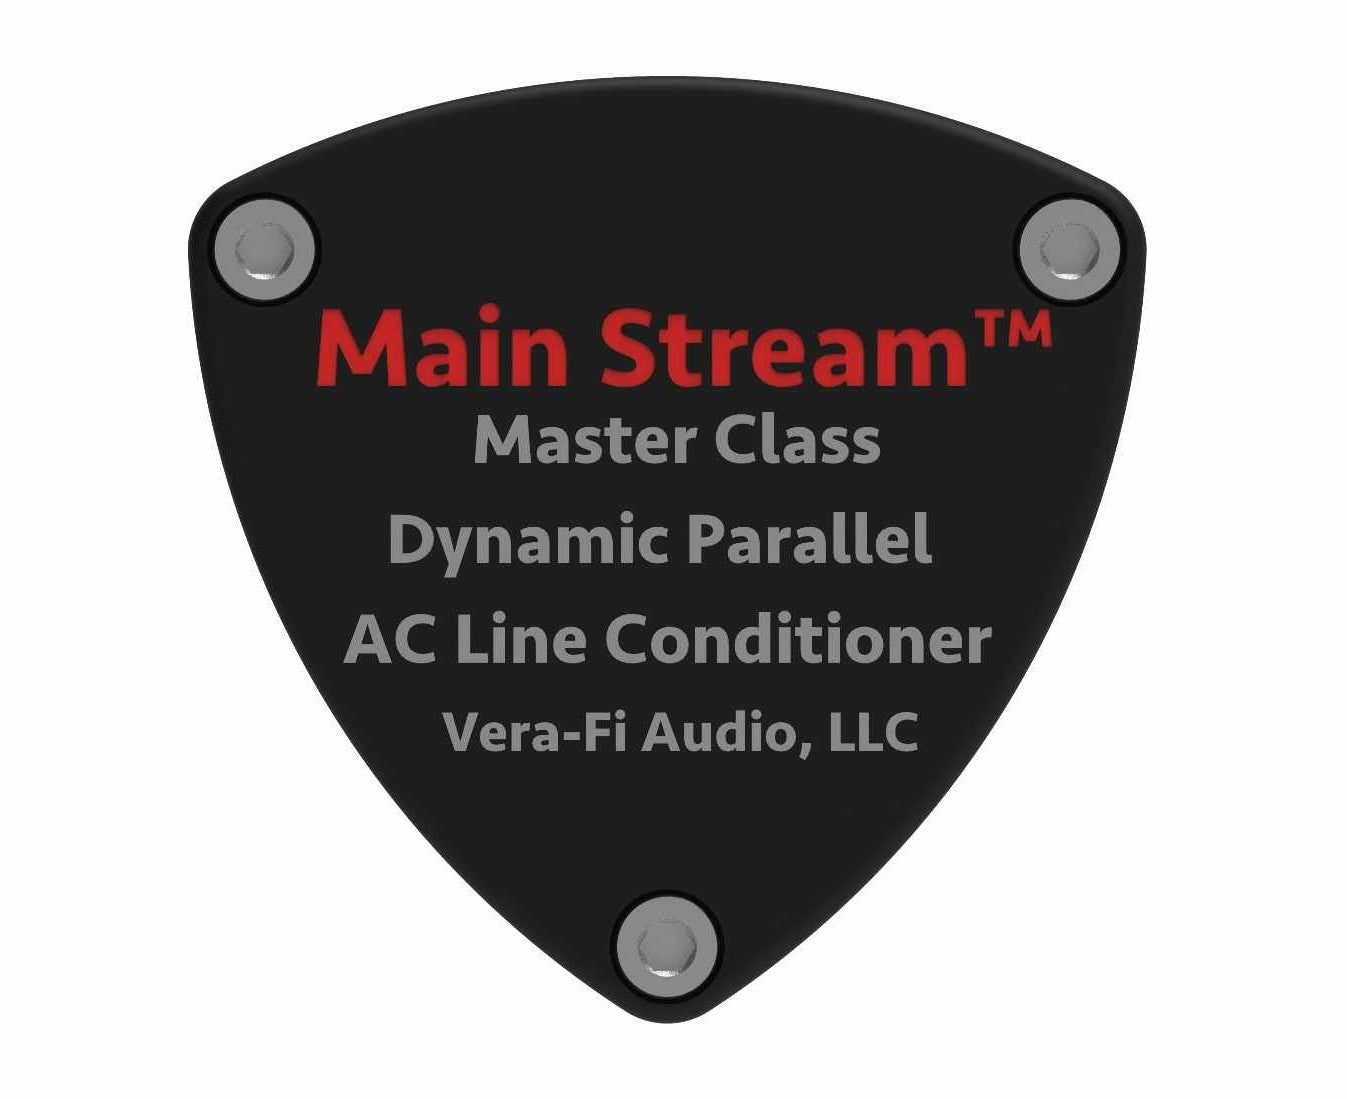 Main Stream - Master Class Dynamic Parallel AC Line Conditioner